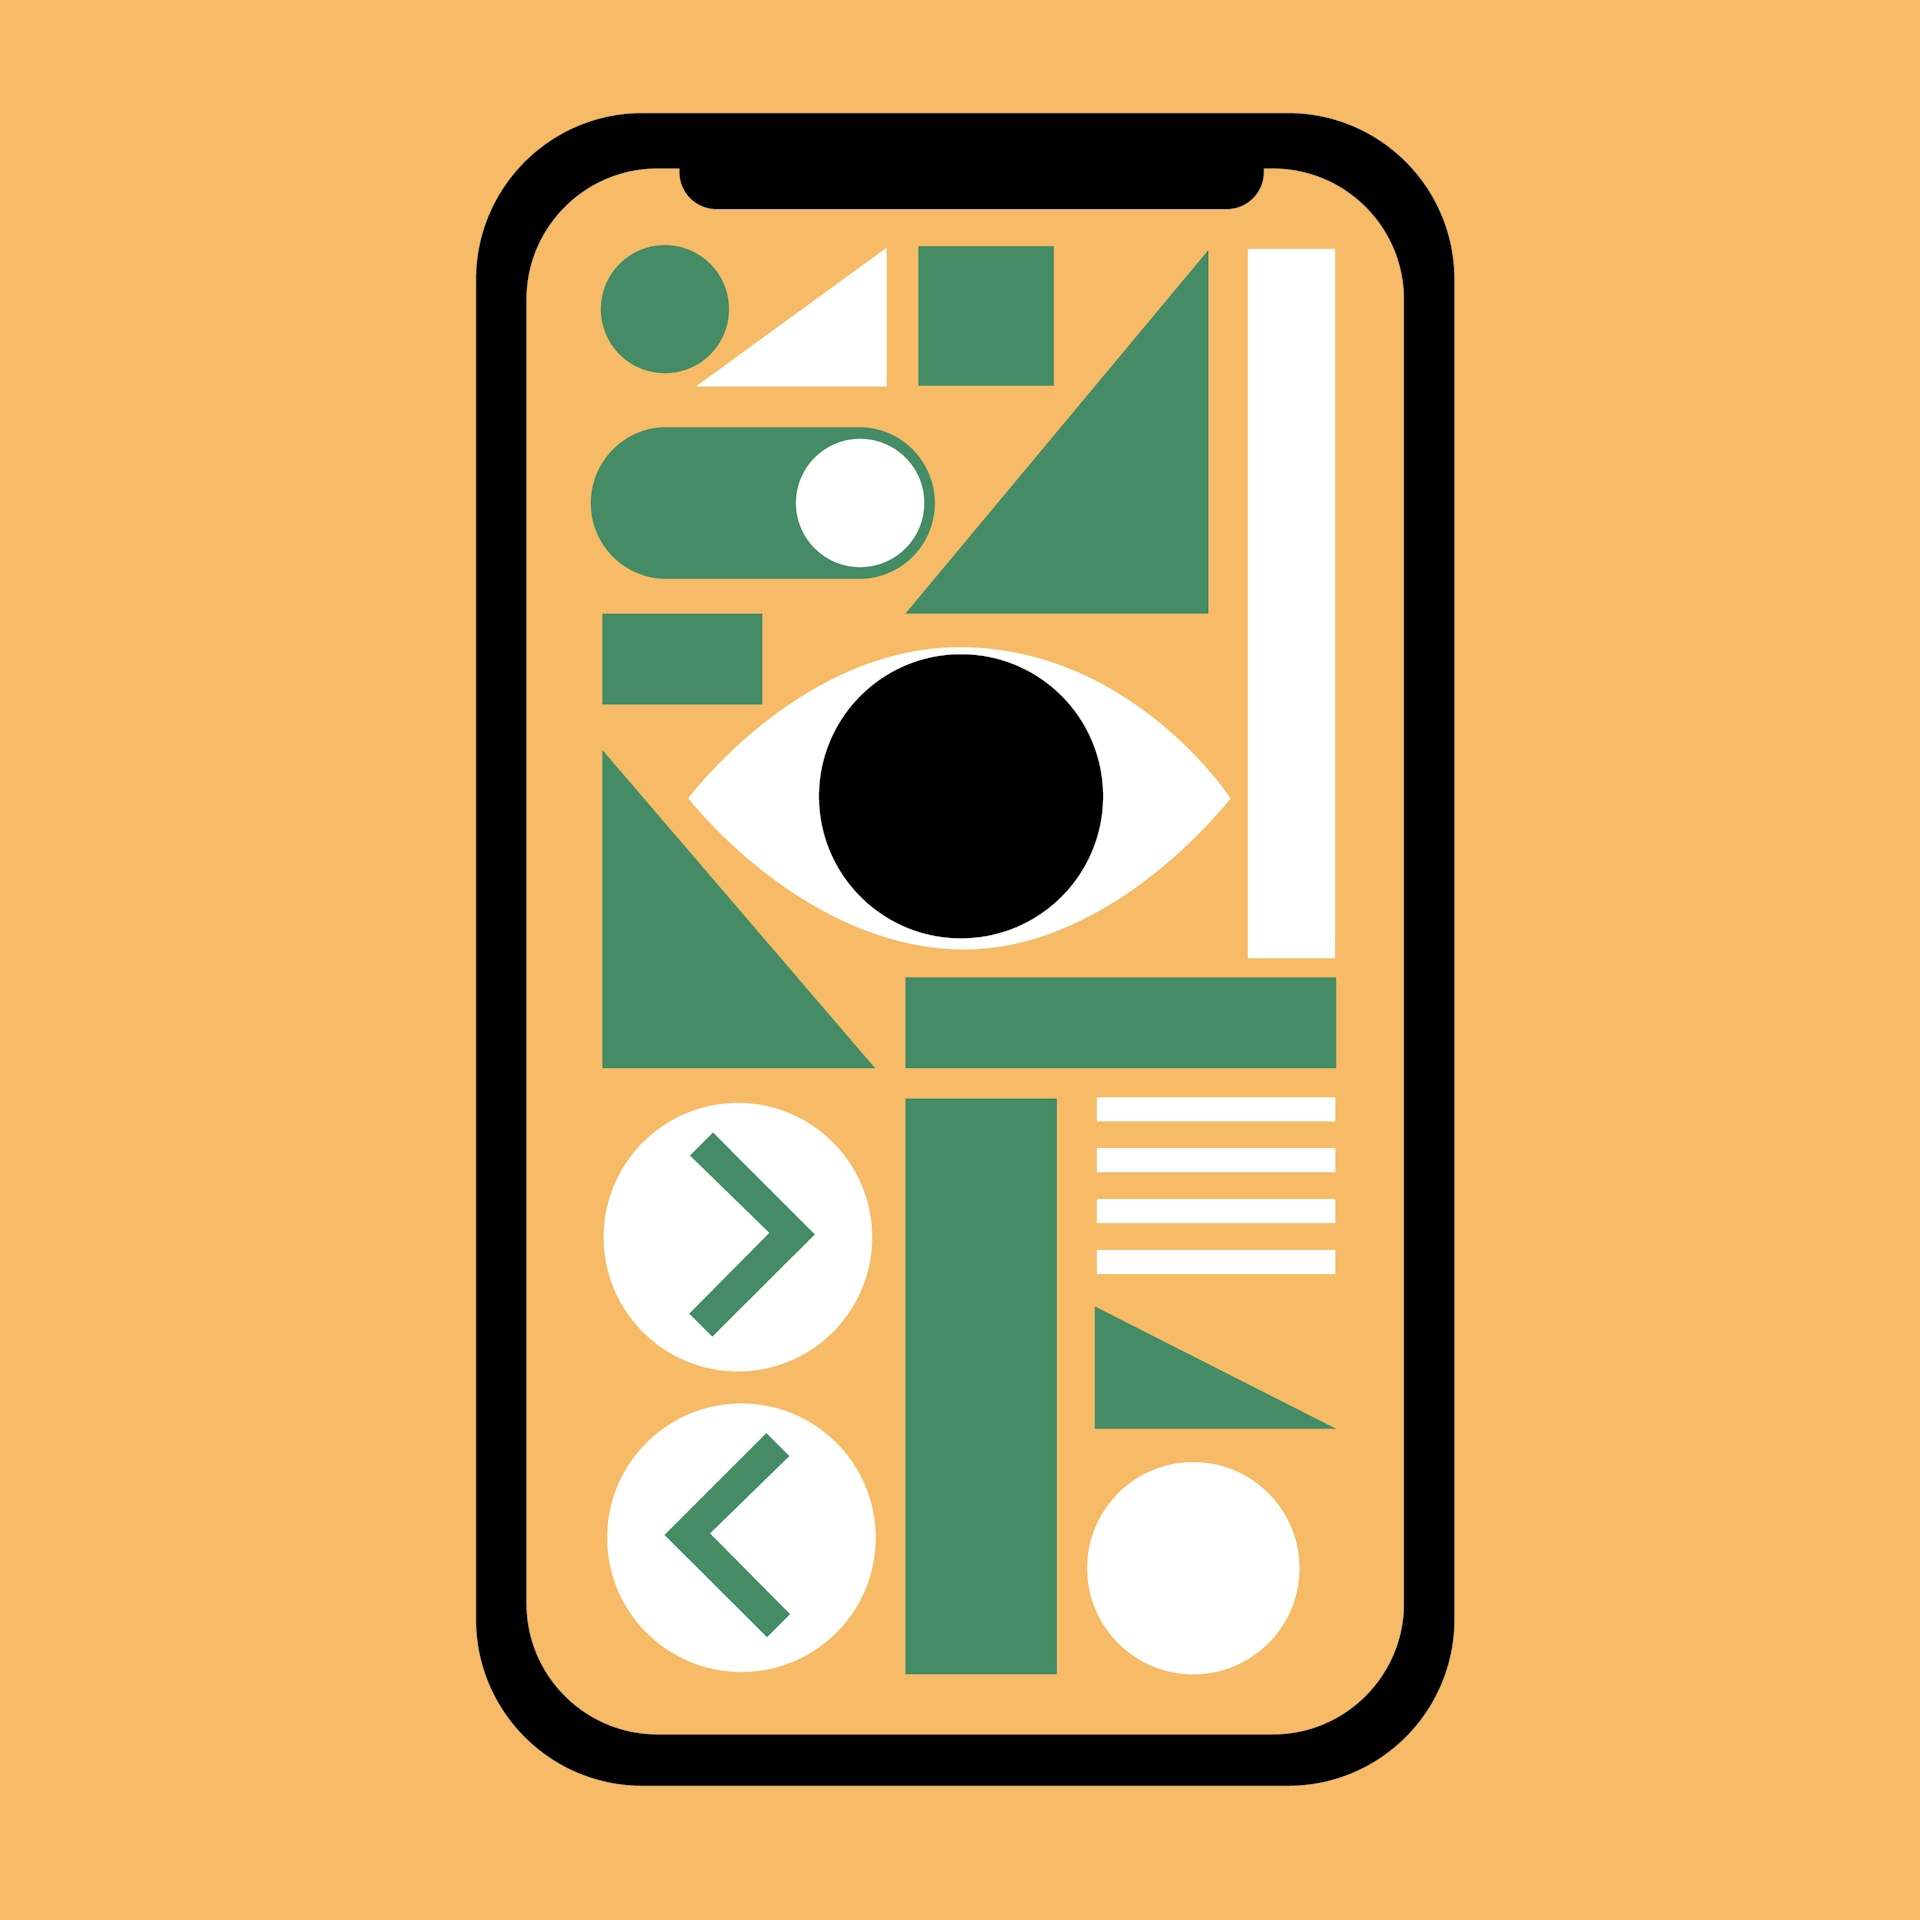 White and green shapes on a mobile phone with a yellow background